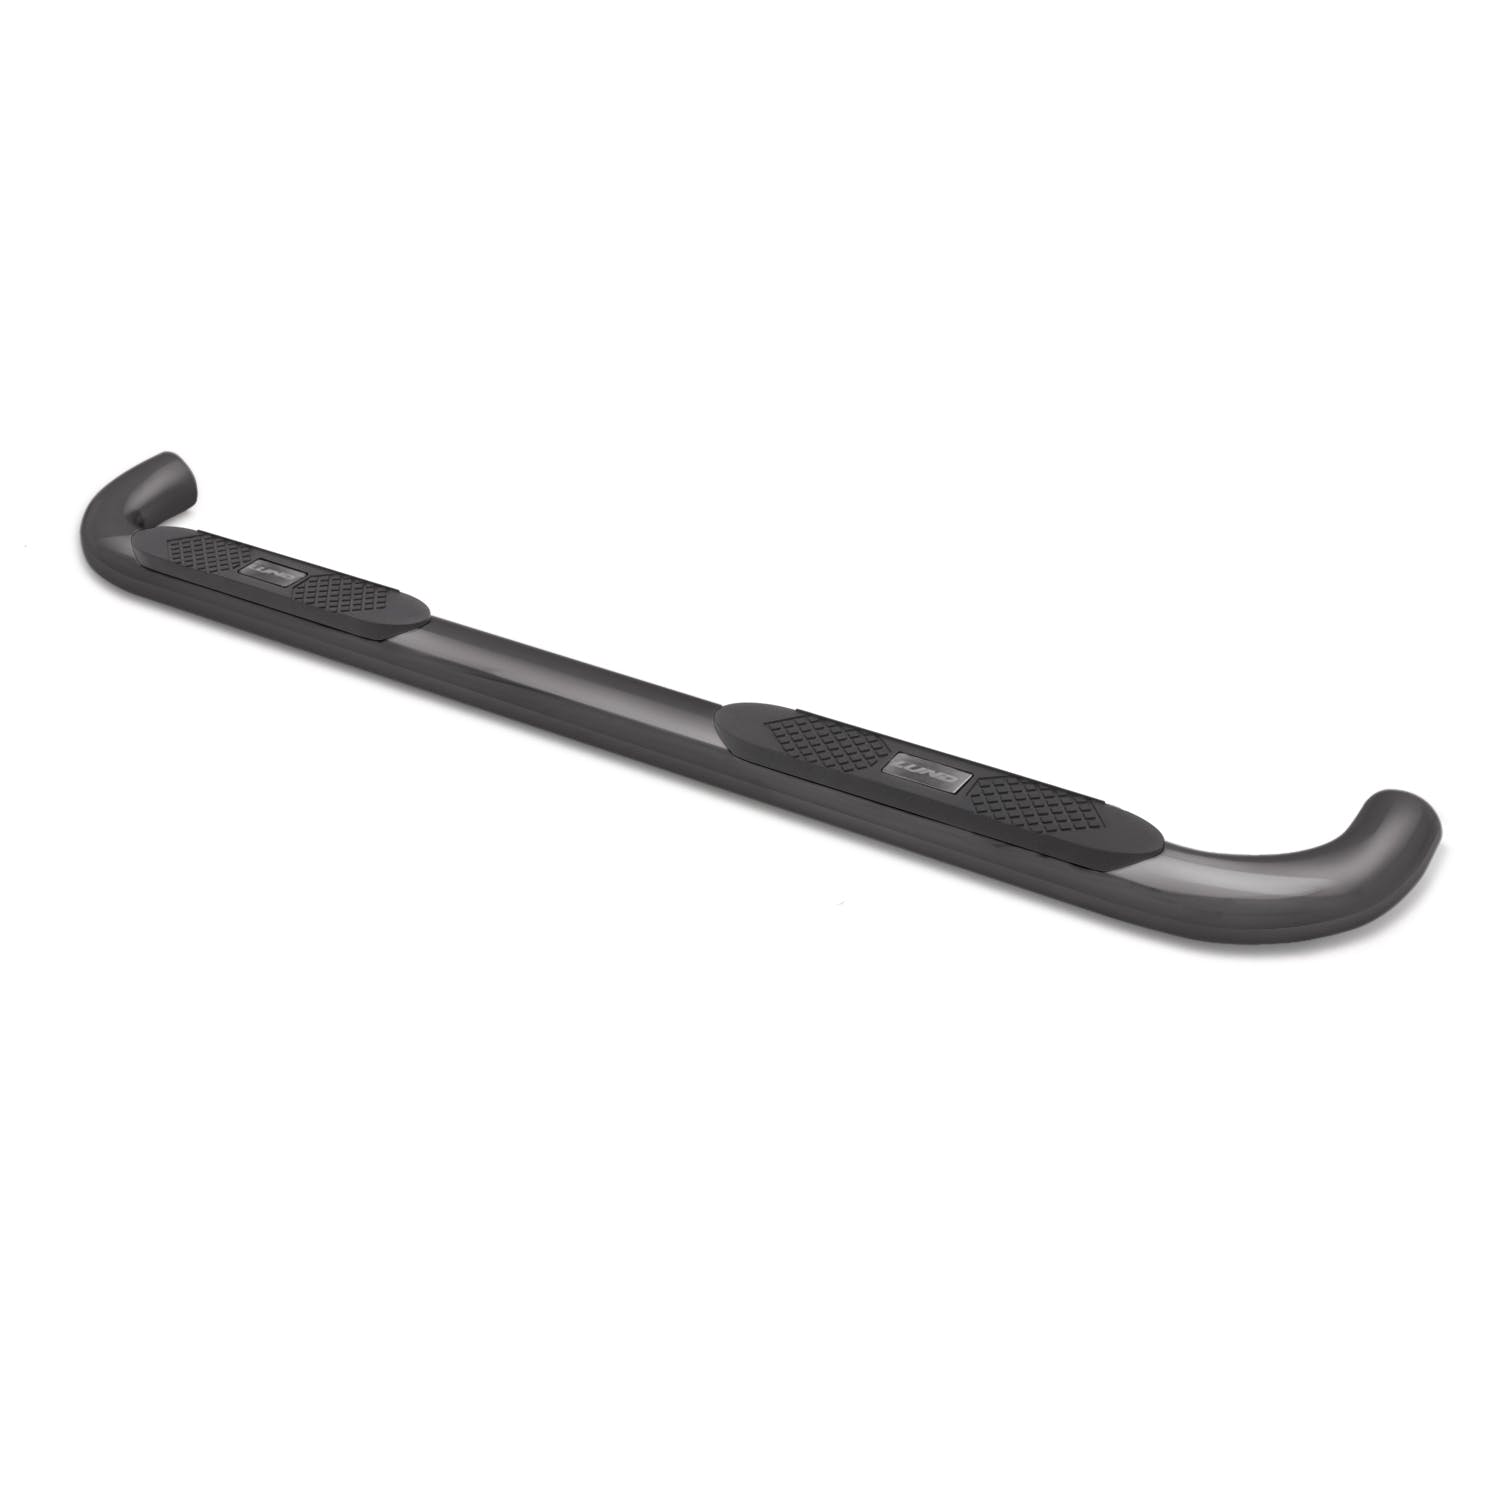 LUND 23476453 4 Inch Oval Curved Nerf Bar - Black 4 In OVAL CURVED STEEL